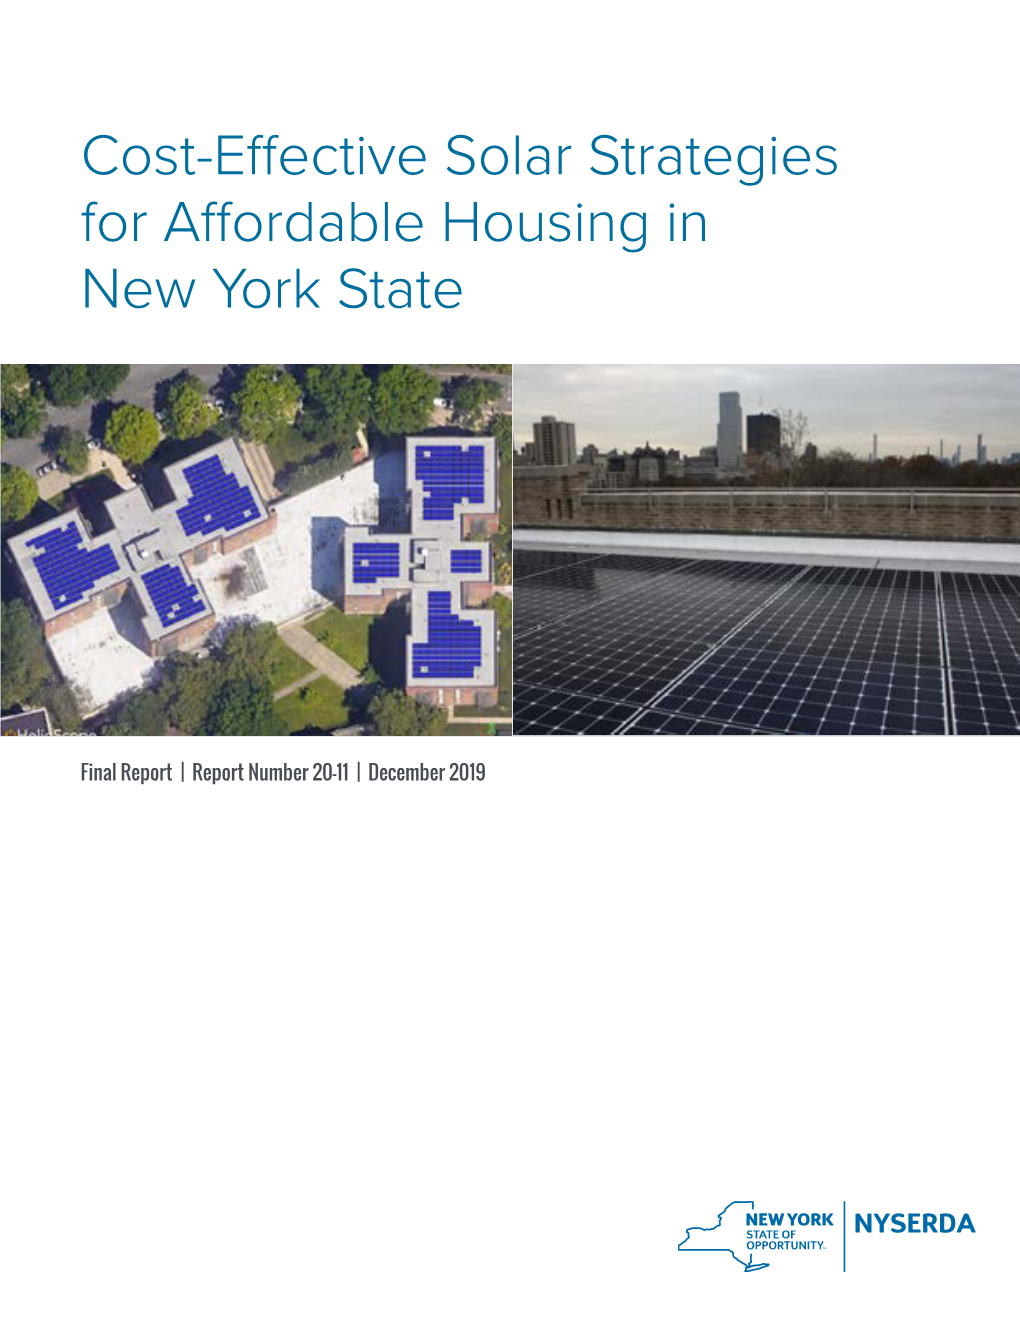 Cost-Effective Solar Strategies for Affordable Housing in New York State